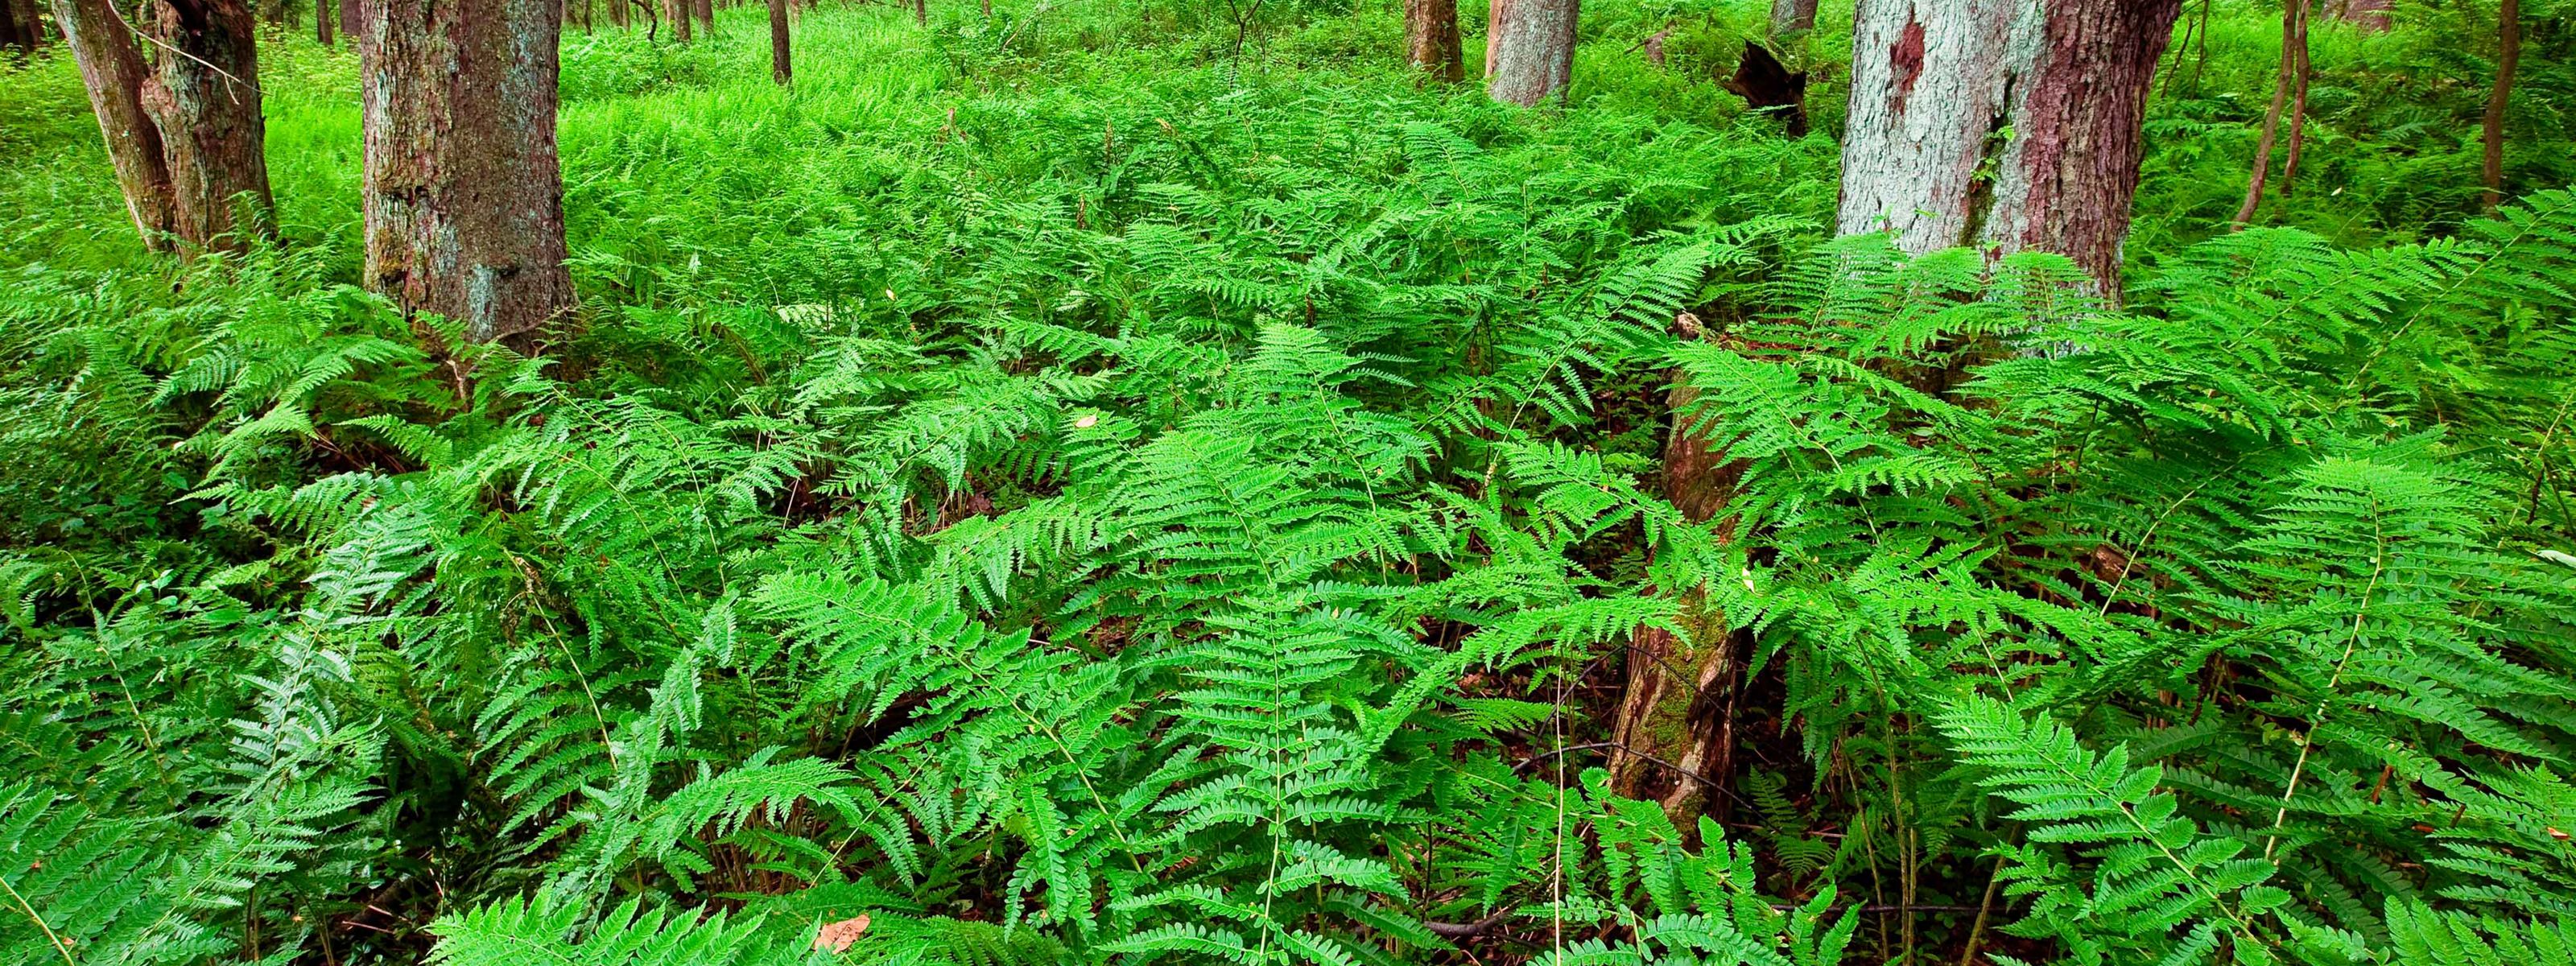 View of a fern-covered forest floor.